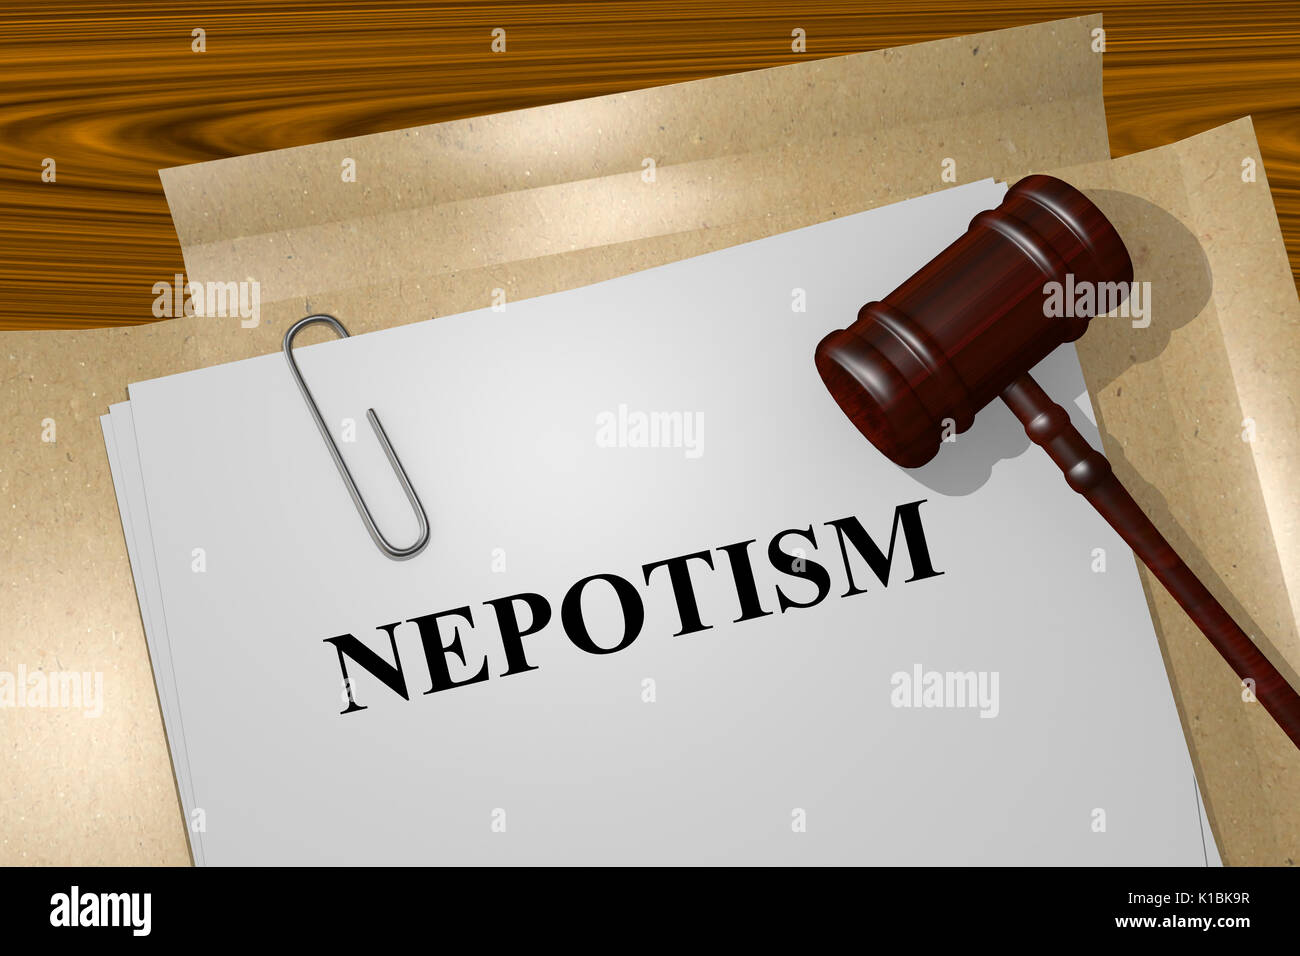 Render illustration of Nepotism title on Legal Documents Stock Photo